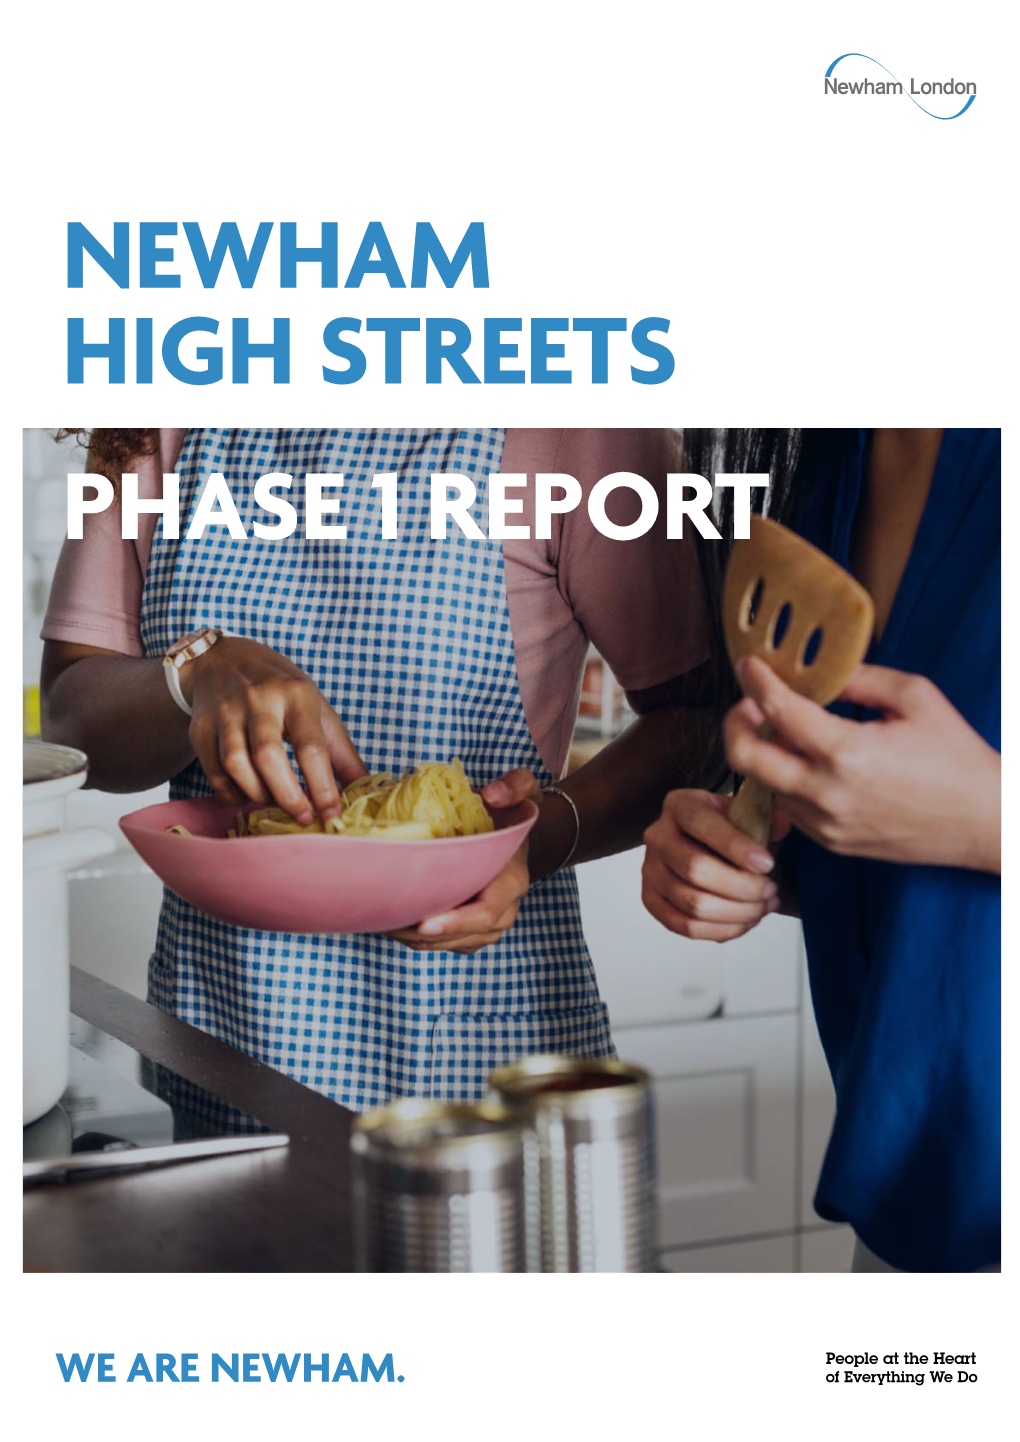 Newham High Streets Phase 1 Report